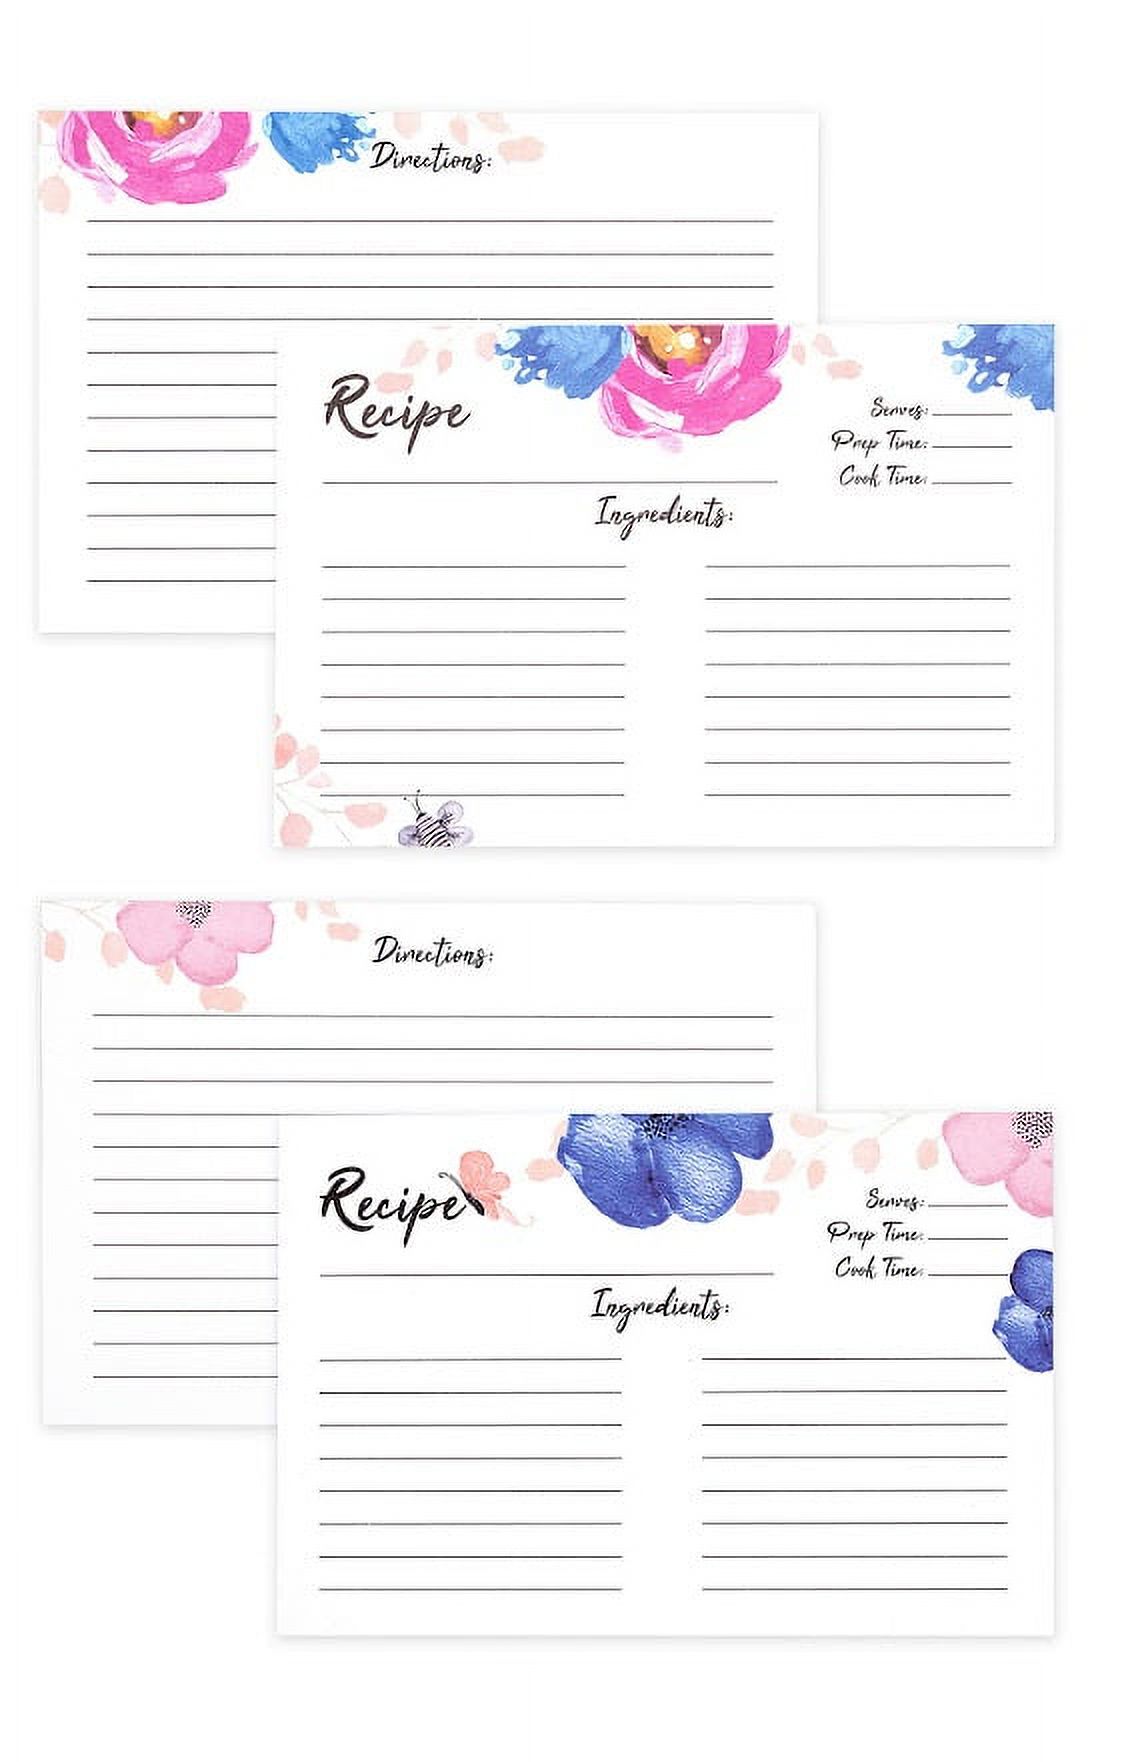 Outshine Floral Recipe Cards with Dividers (Set of 104), 100 Blank Recipe  Cards 4x6 Inches with 4 Recipe Card Dividers with Tabs, Double Sided Thick  Card Stock